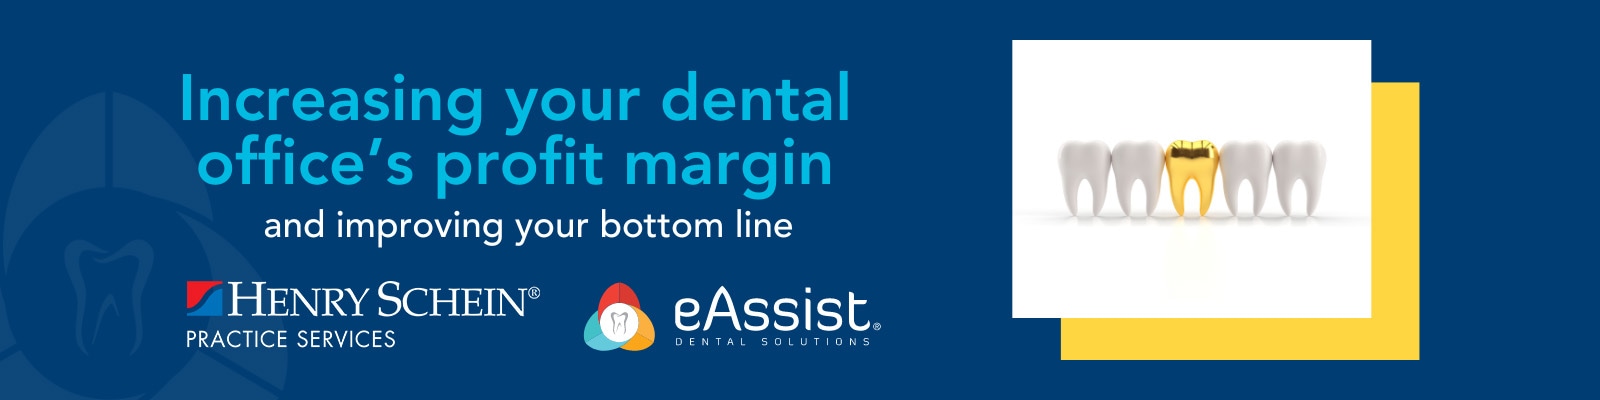 Increasing your dental practice's profit margin and improving your bottom line.